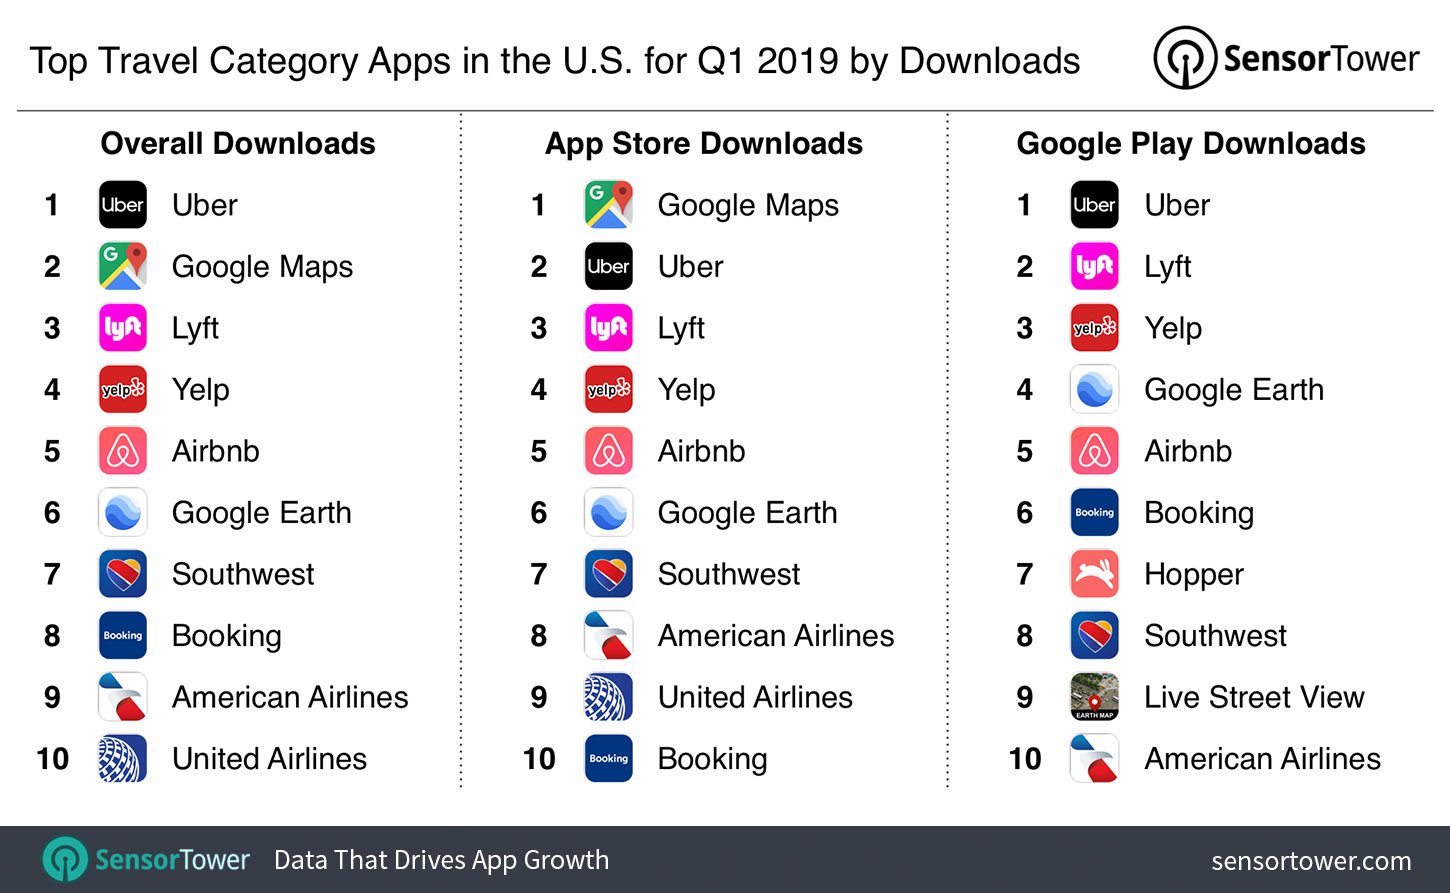 Top Travel Apps in the U.S. for Q1 2019 by Downloads